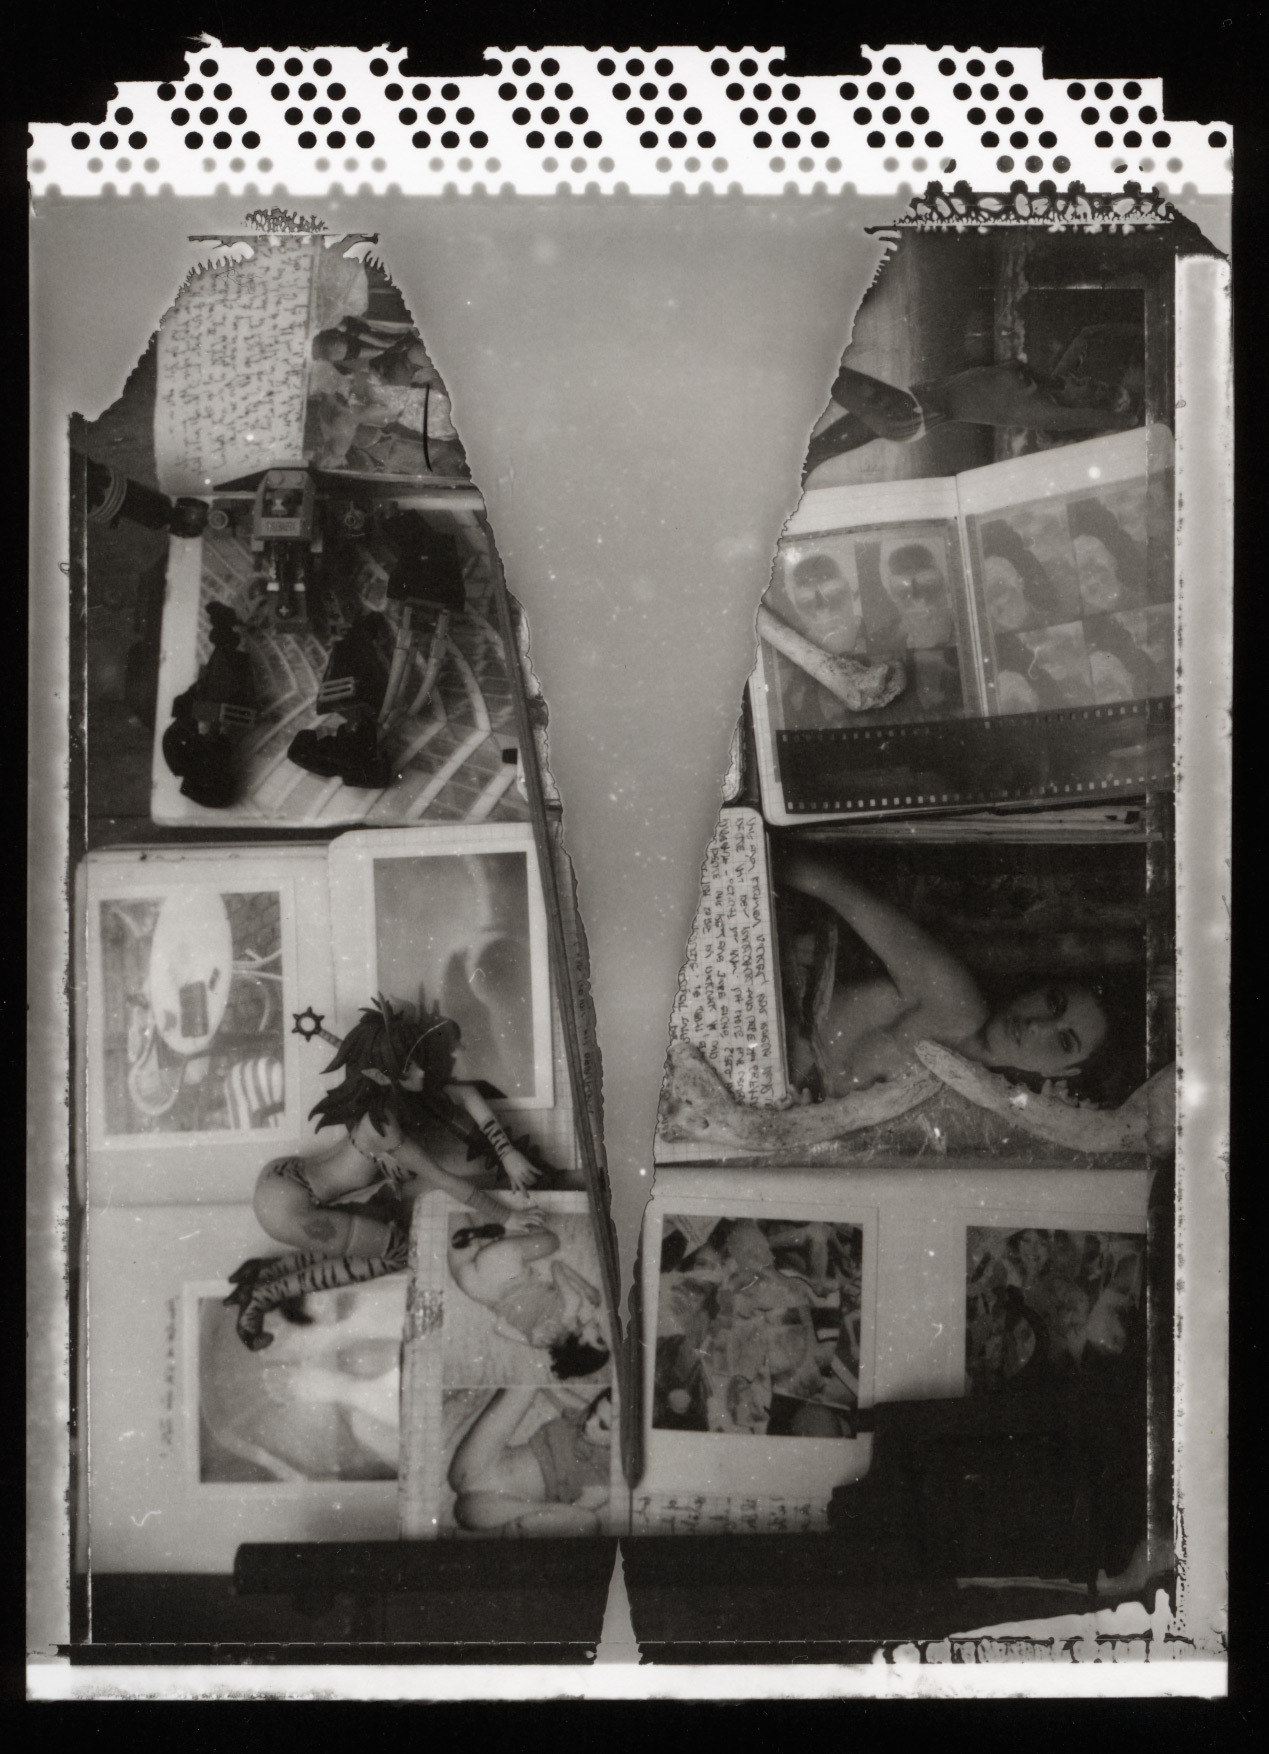 Obsessions
Contact Print from a Polaroid 55 4x5 negative